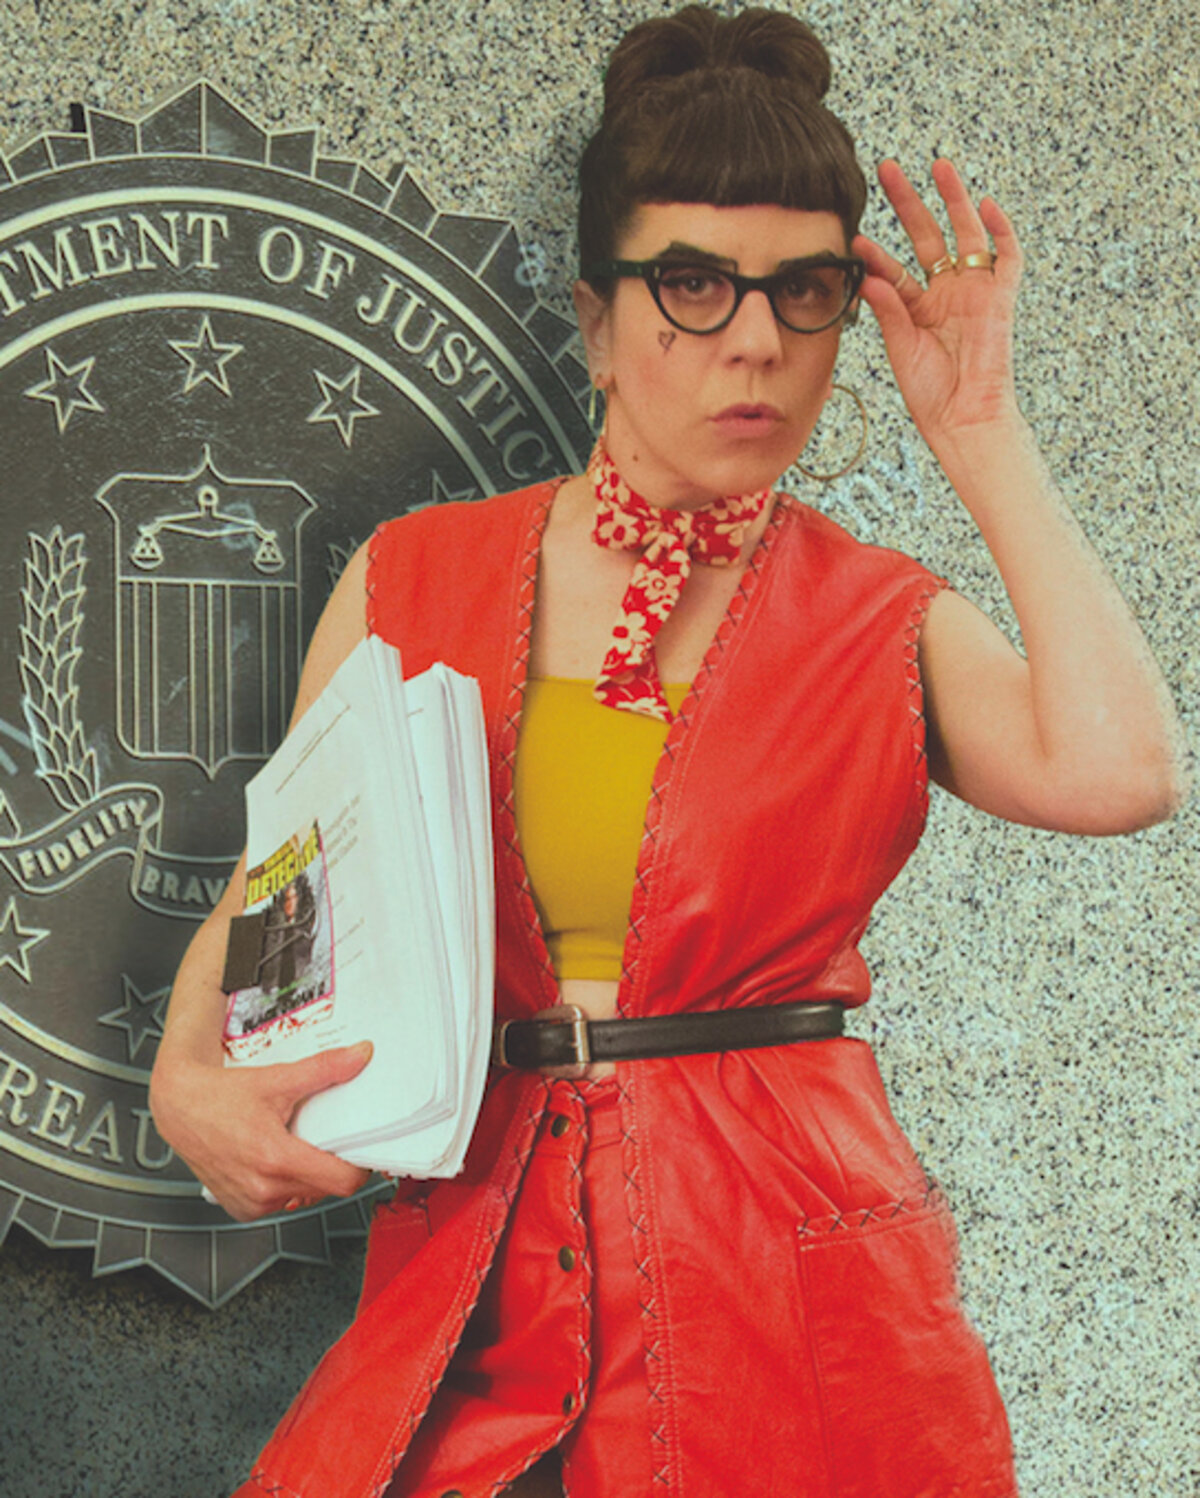 Liz, wearing a red dress, in front of the Department of Justice, holding her play